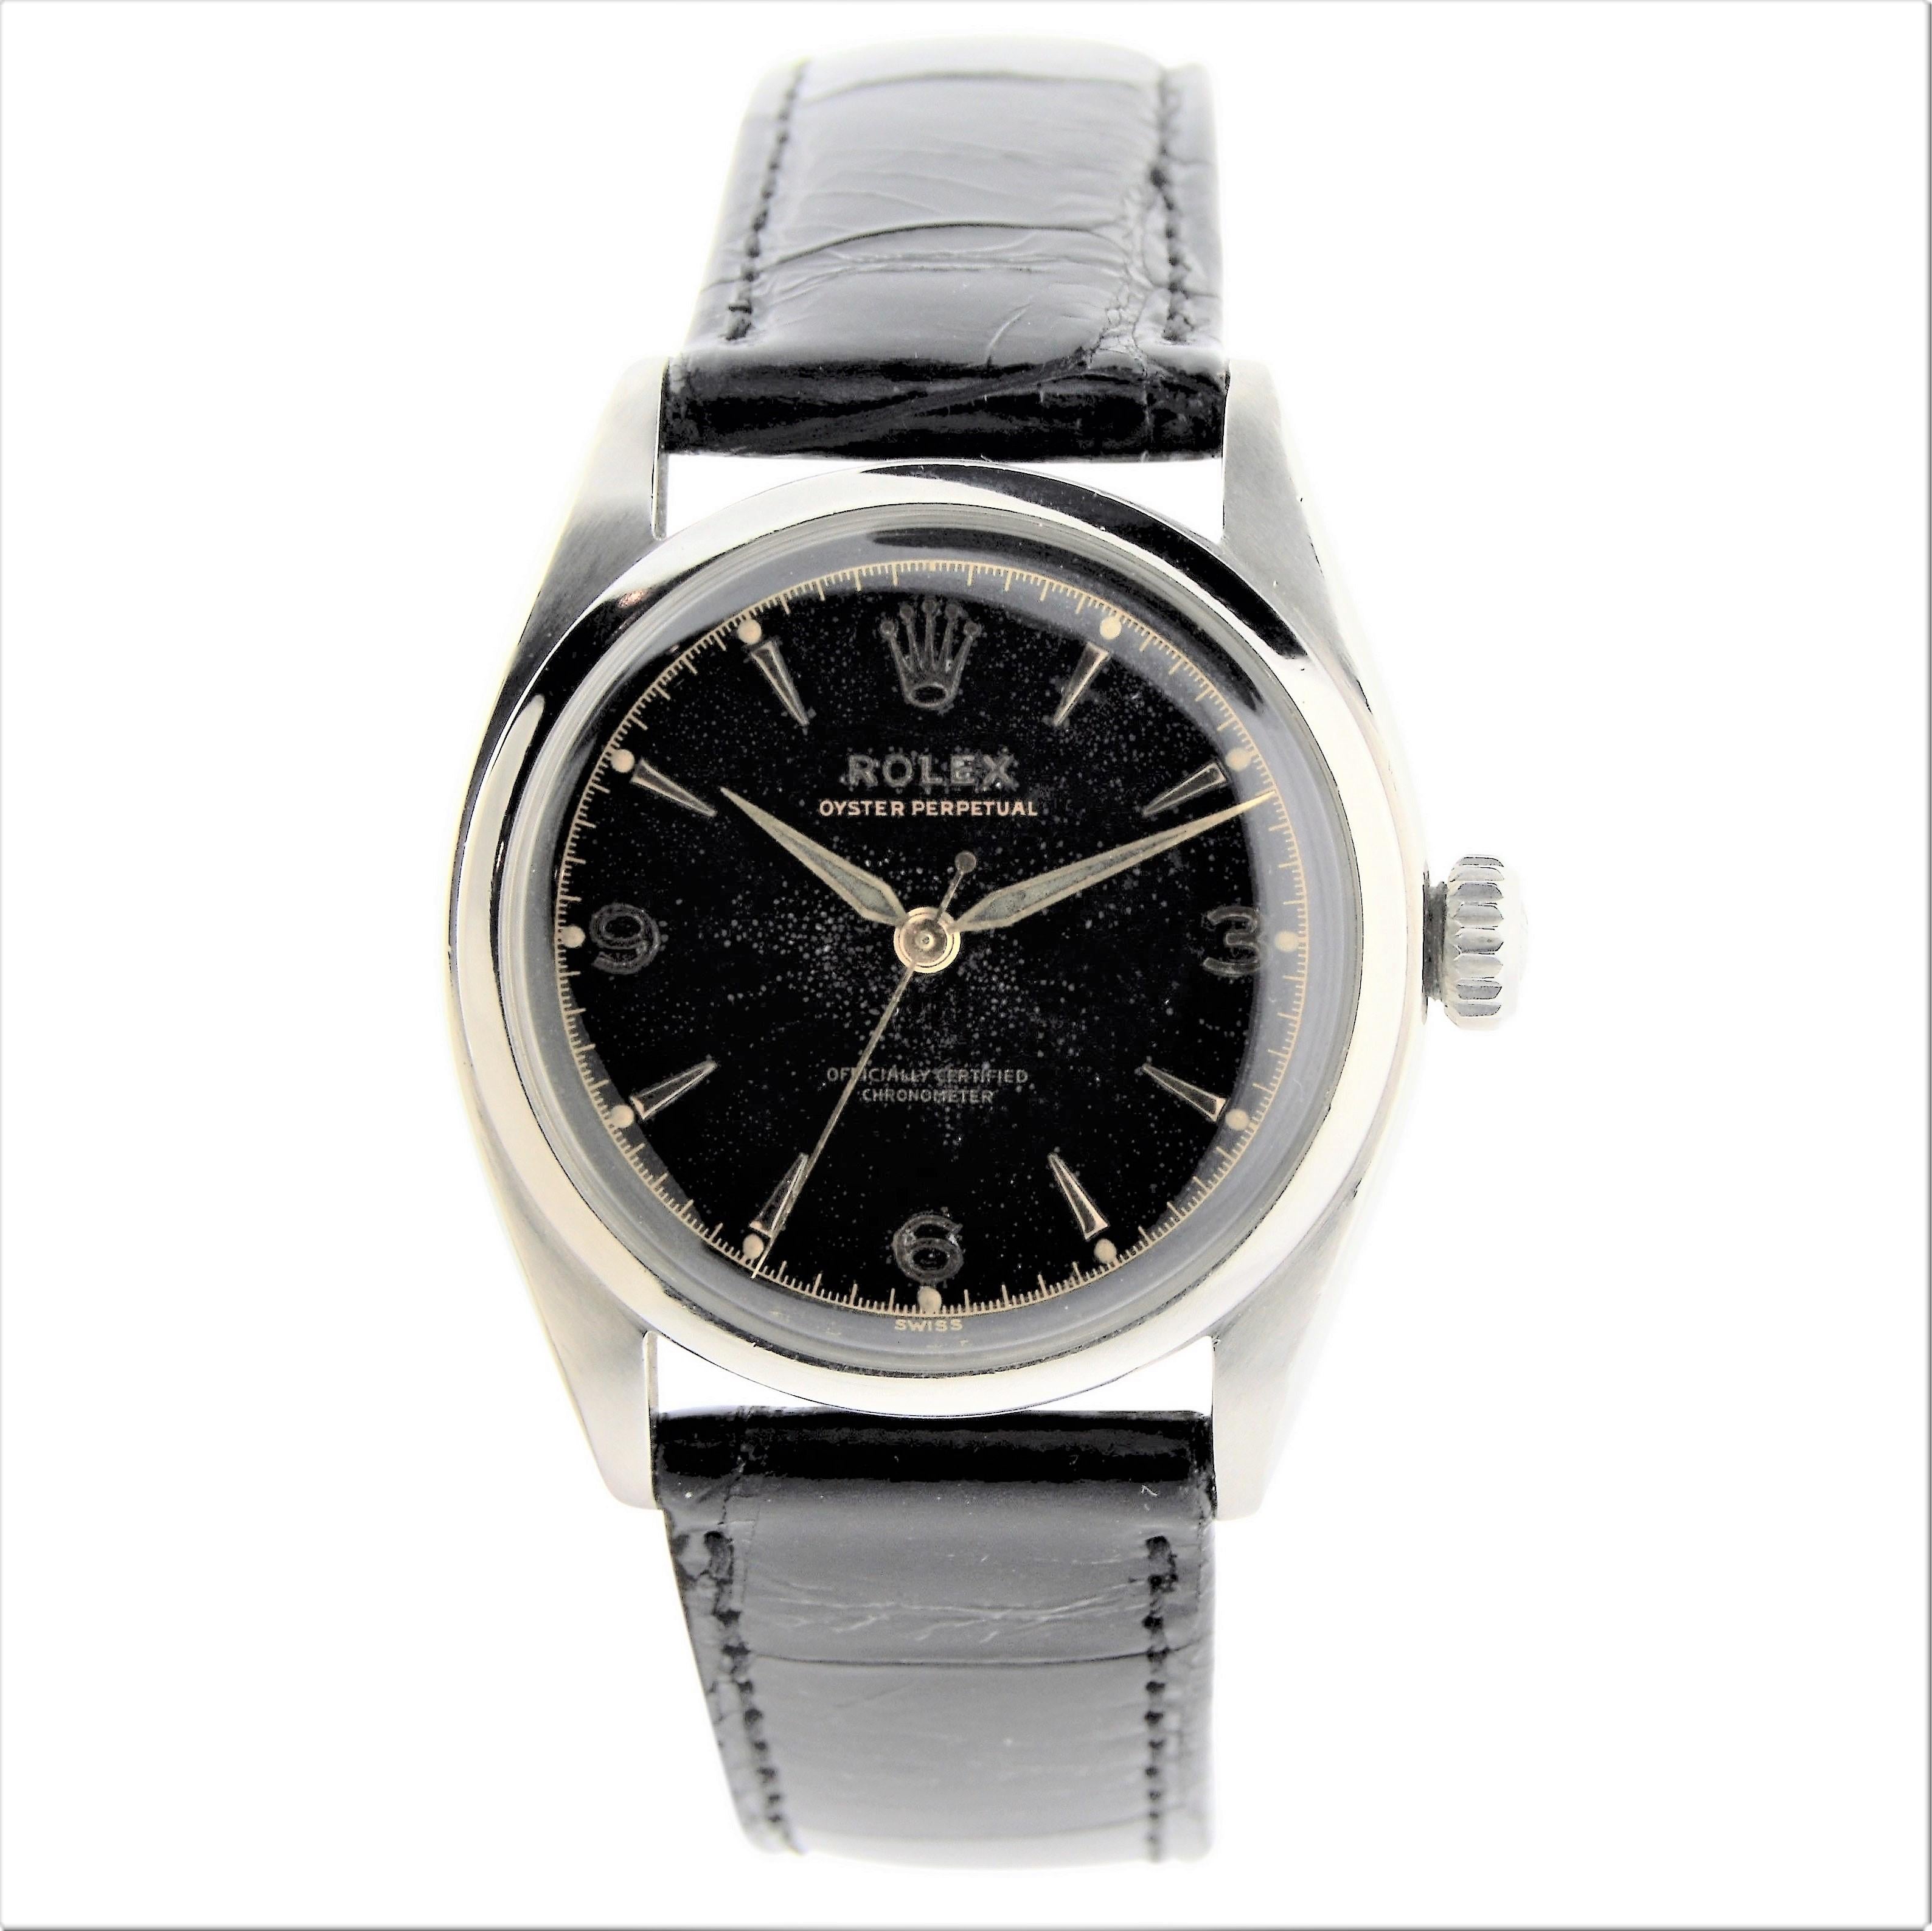 FACTORY / HOUSE: Rolex Watch Company
STYLE / REFERENCE: Oyster Perpetual / Ref. 6084
METAL / MATERIAL: Stainless Steel
DIMENSIONS: 39mm X 33mm
CIRCA: 1953 / 54
MOVEMENT / CALIBER: Perpetual Winding / cal. 645 / 20 Jewels
DIAL / HANDS: Black Dial